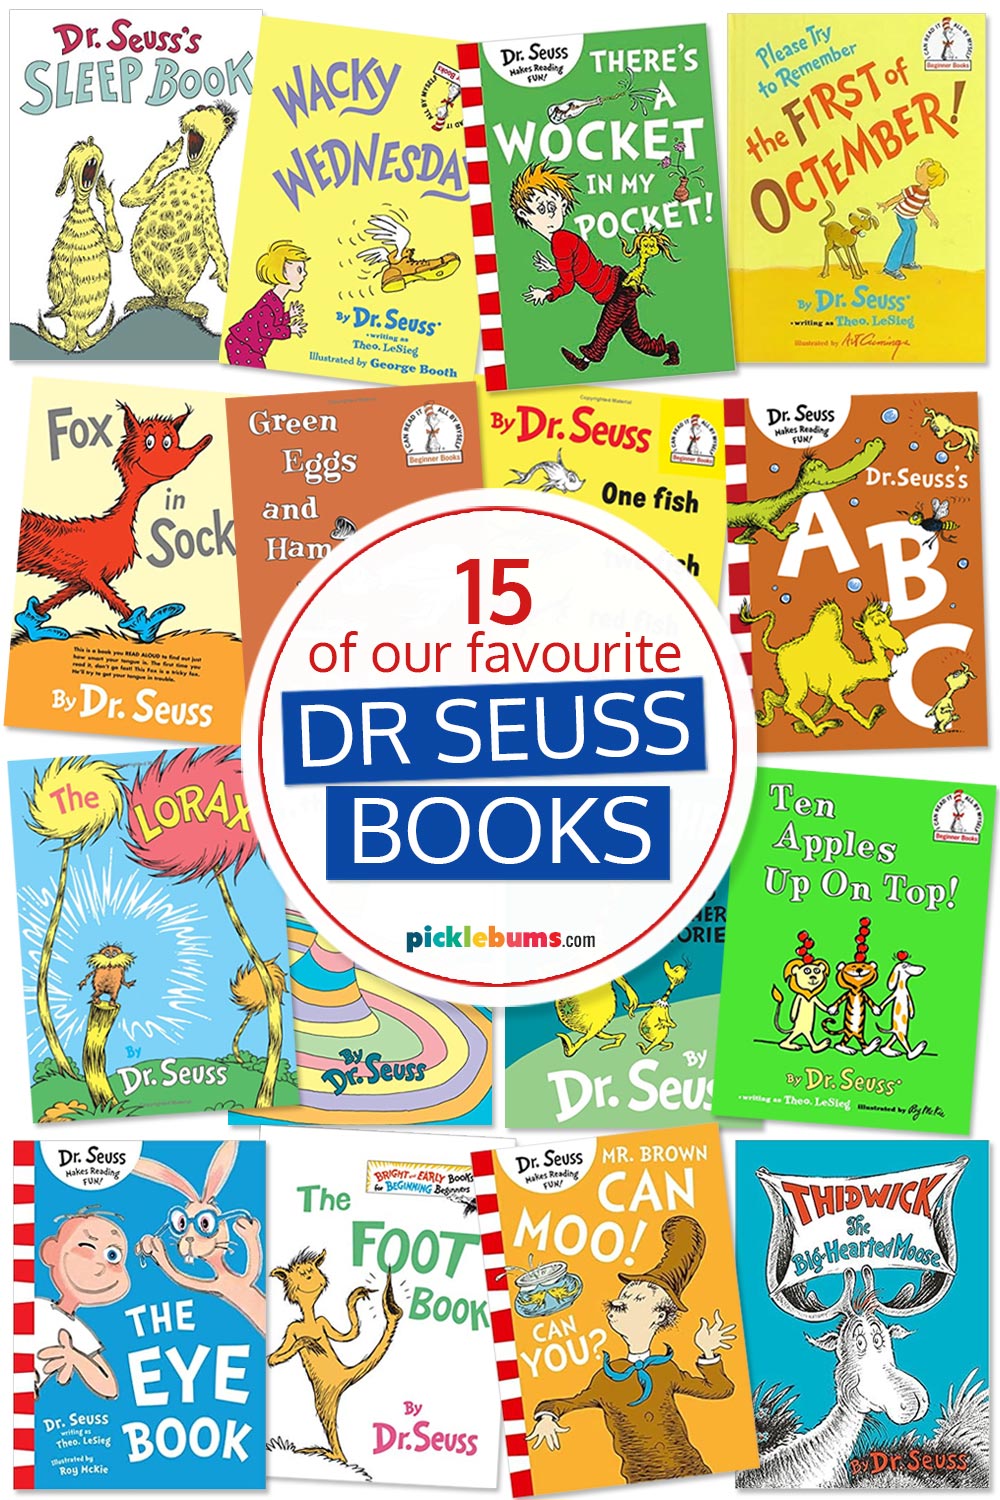 Collage of covers of Dr Seuss books